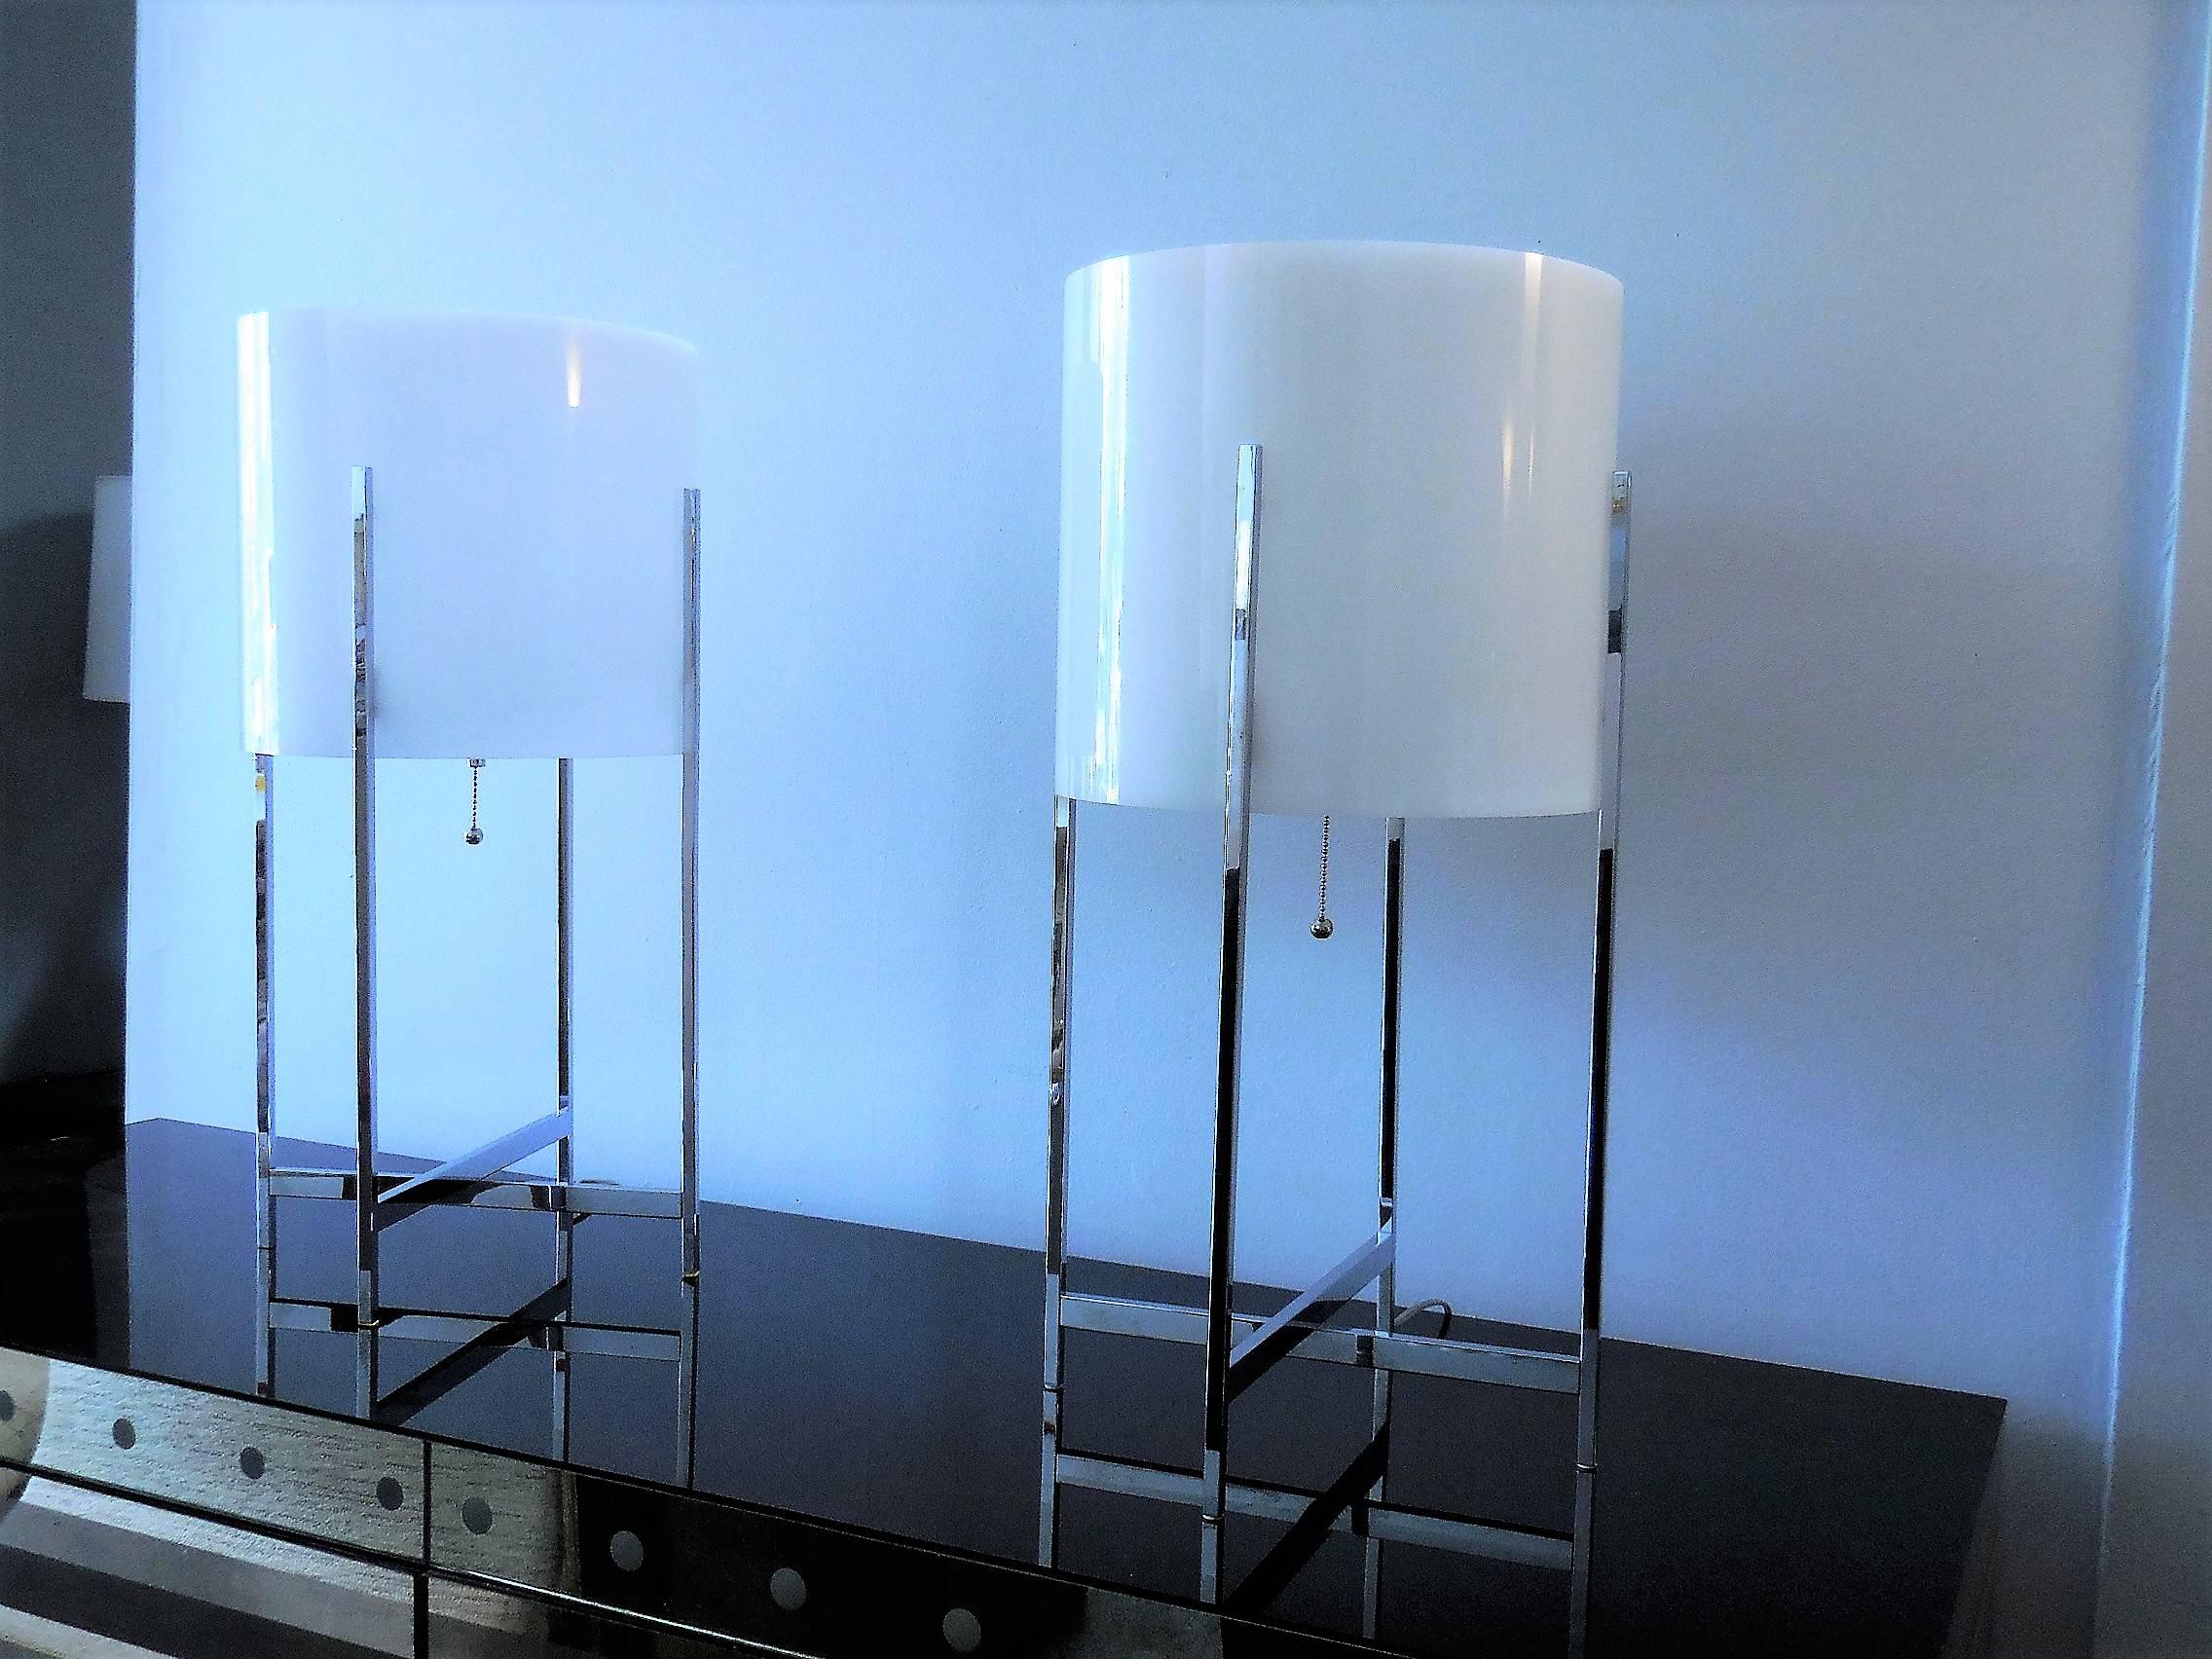 A pair of modern lamps by Paul Mayen. The frame is thin square chrome and the shade/diffuser is white acrylic. Modern Minimalist look from the 1970s.